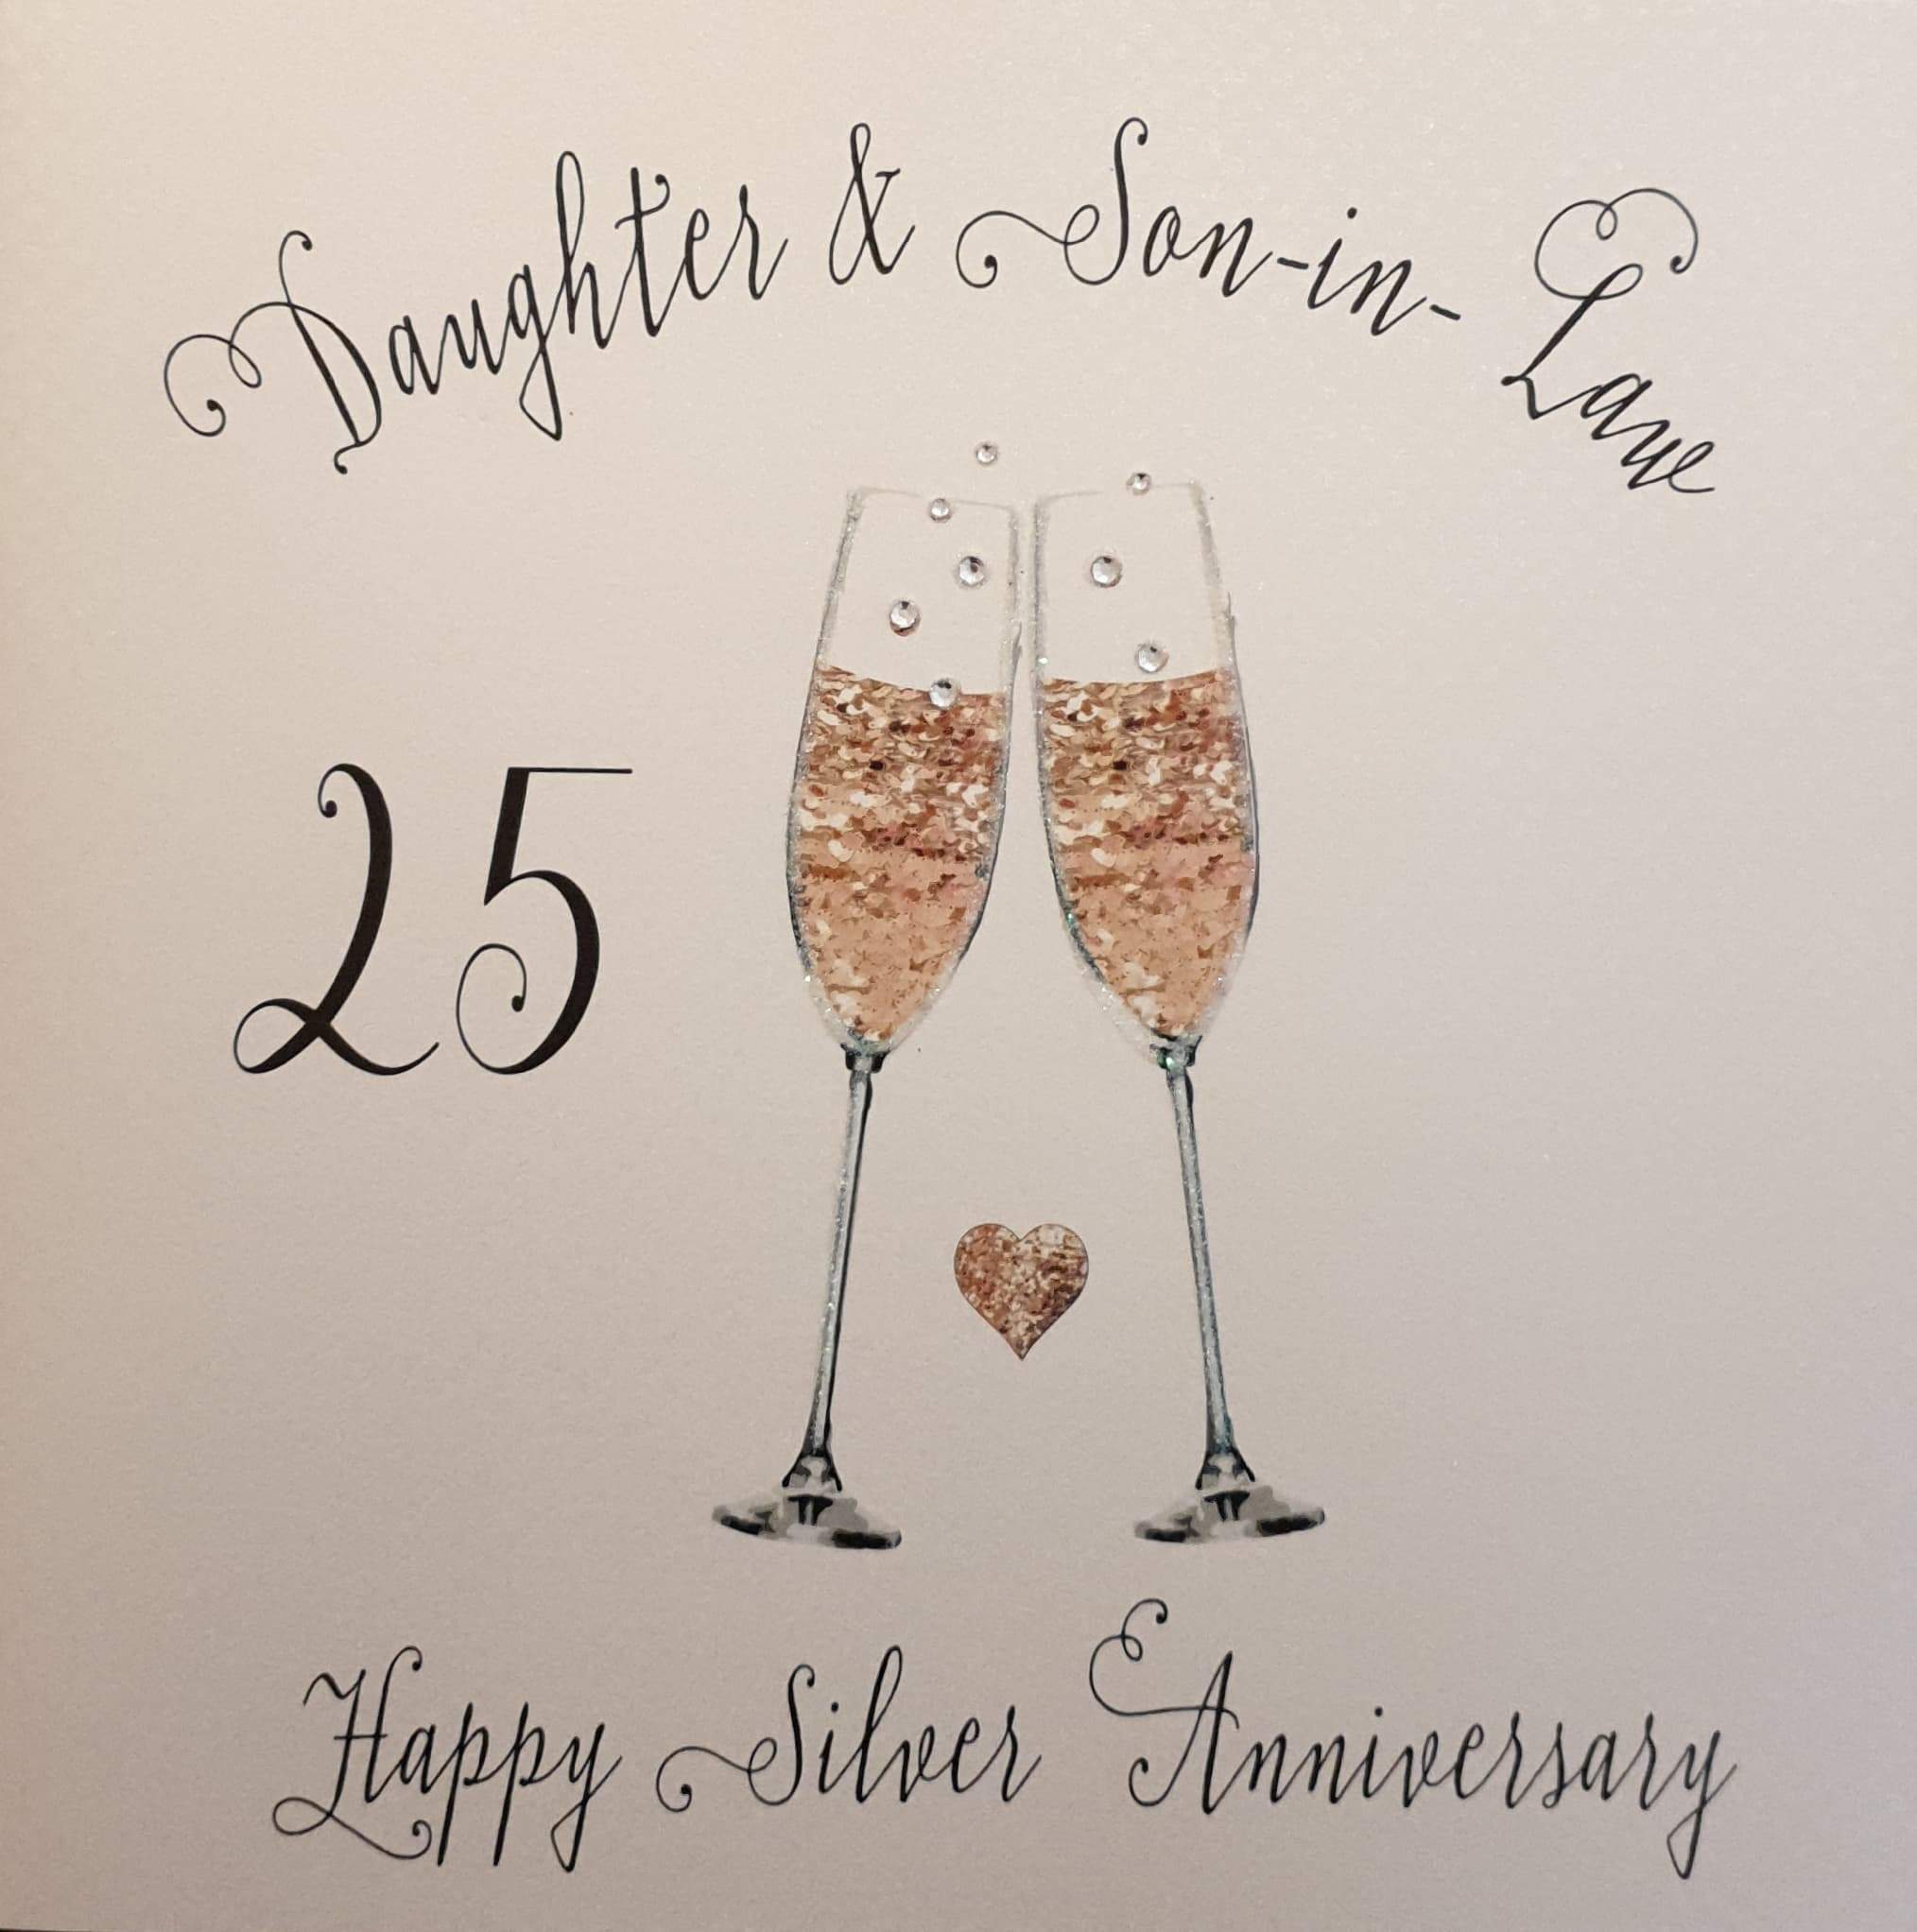 Anniversary Card - 25th Anniversary - Daughter & Son-in-Law / Two Champagne Glasses & Gold Heart  (Large Card)